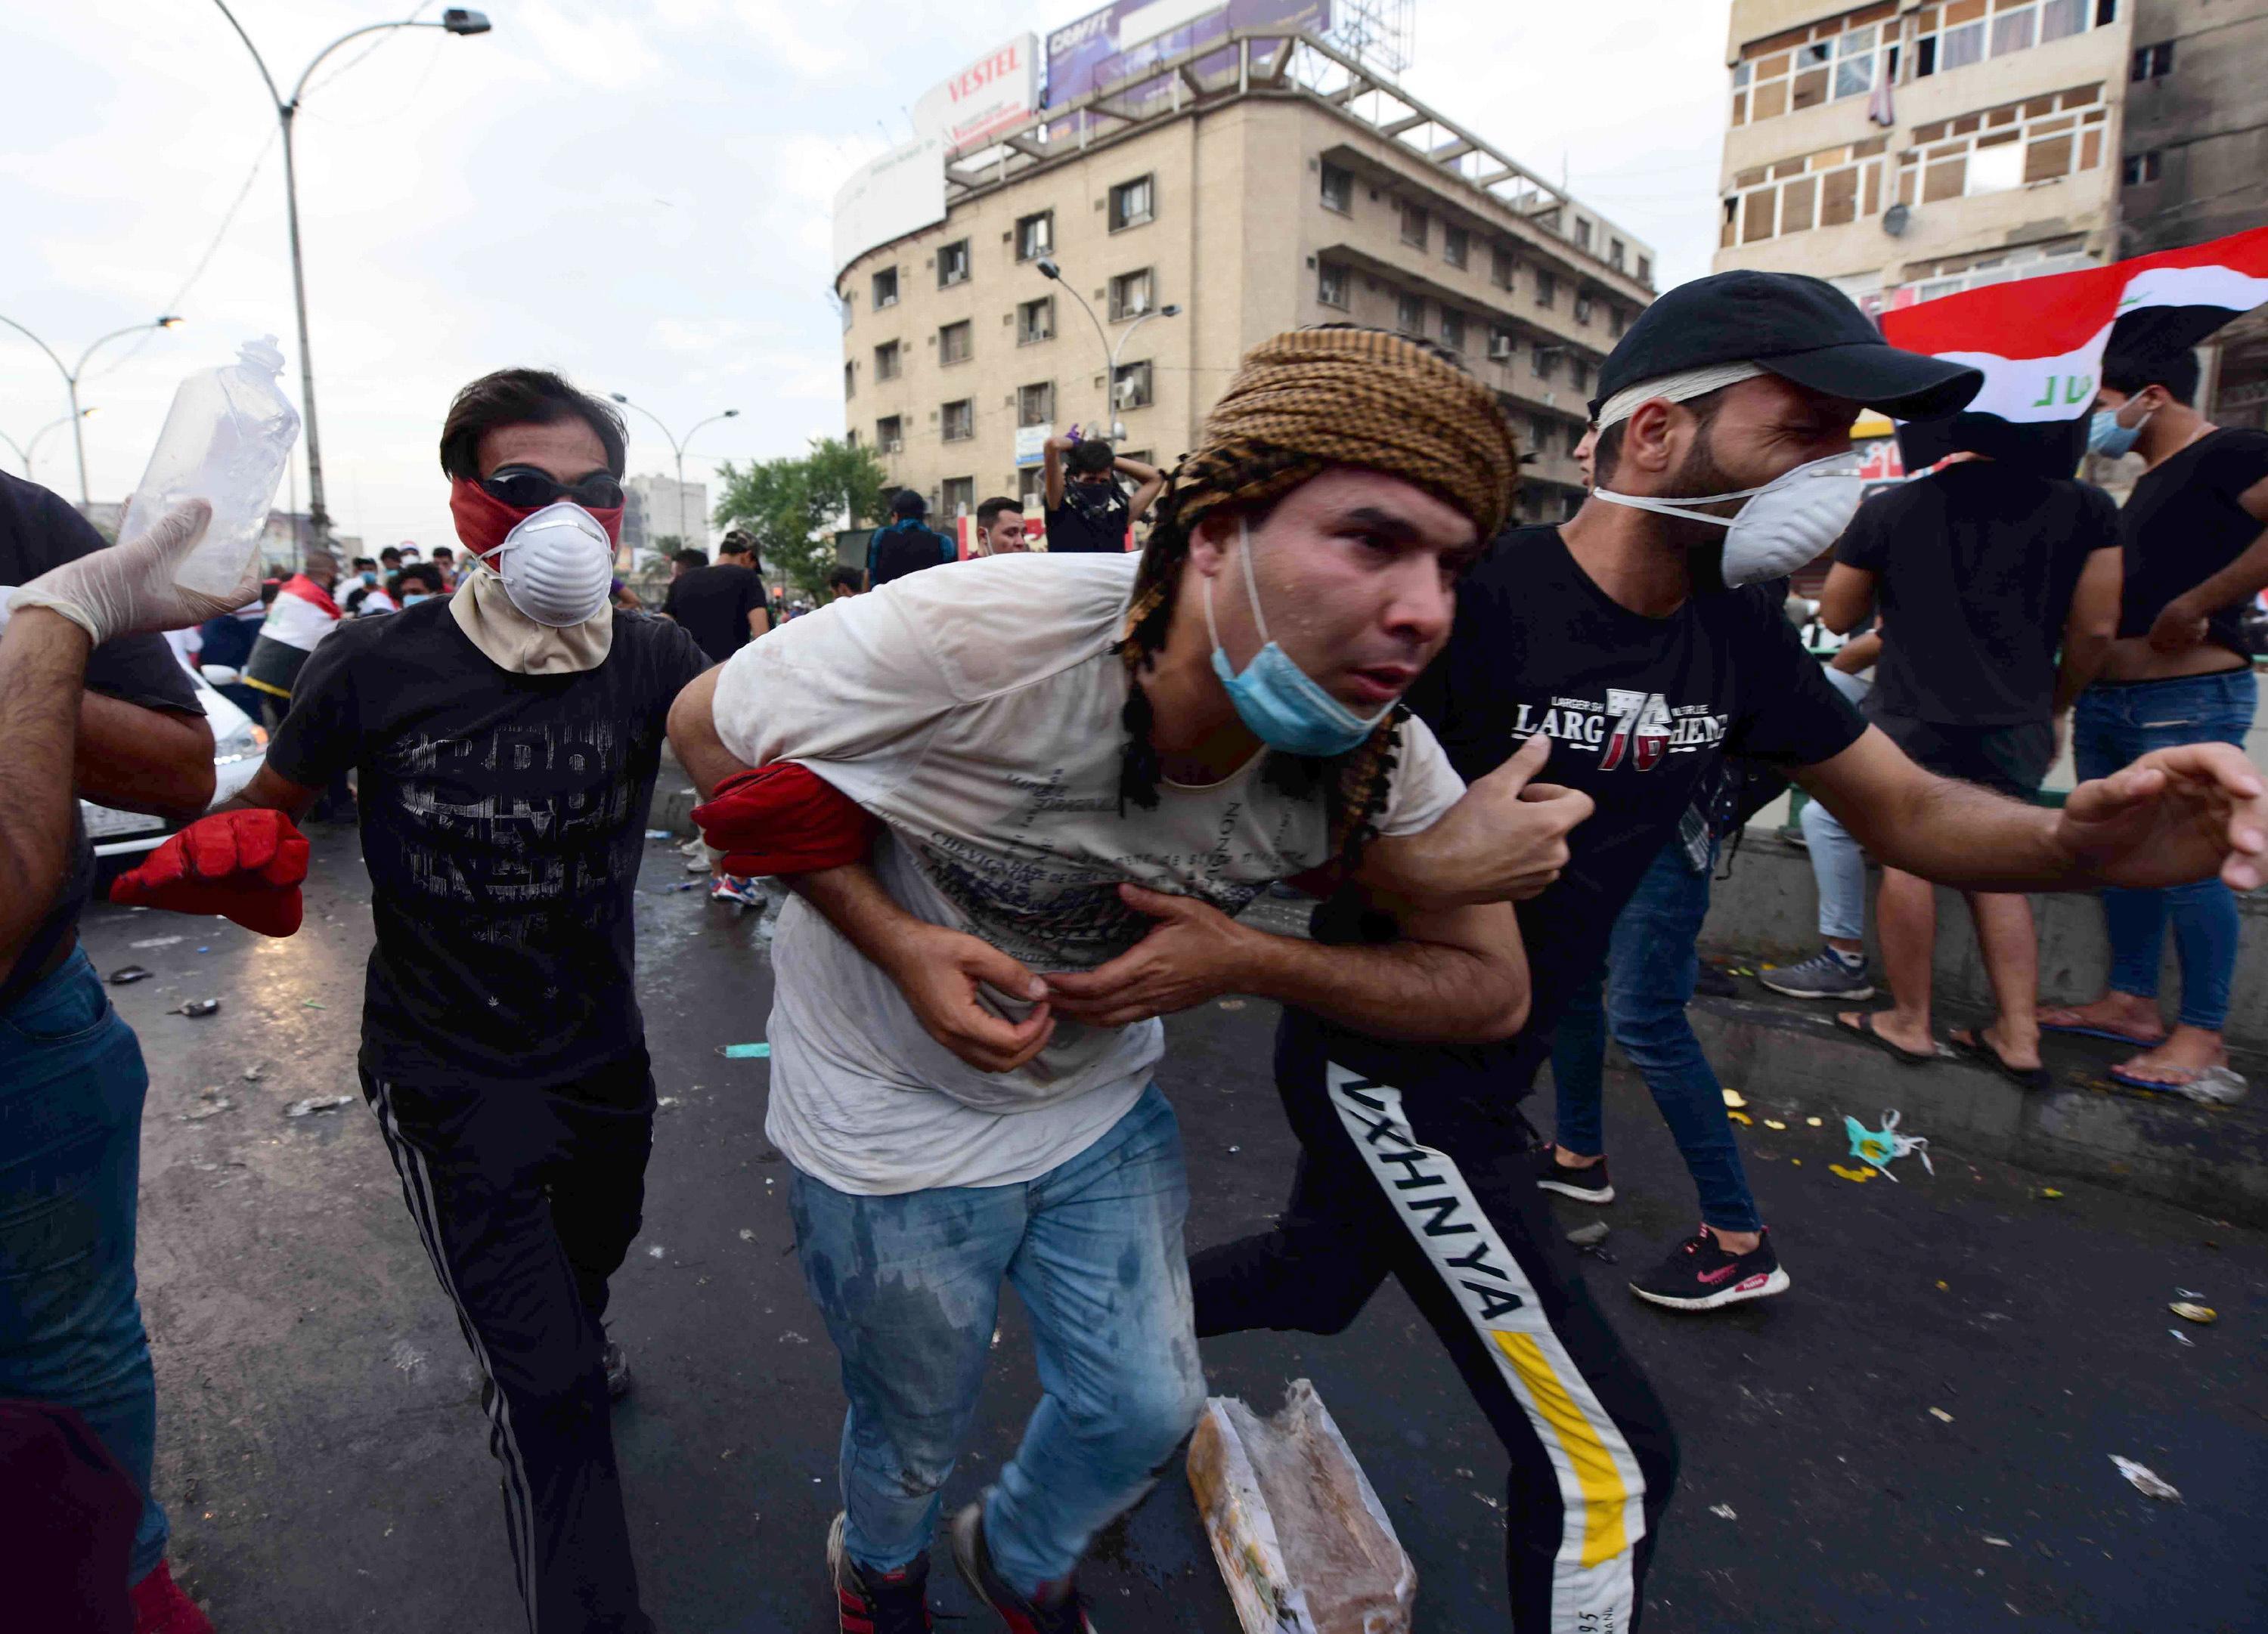 epa07954348 Iraqi protesters help a man who was injured during clashes with Iraqi riot forces following a demonstration at al-Tahrir square, central Baghdad, Iraq, 27 October 2019. According to media reports, at least 63 people died during three days of violent clashes between security forces and people protesting against the government in Baghdad and southern Iraqi cities.  EPA/MURTAJA LATEEF